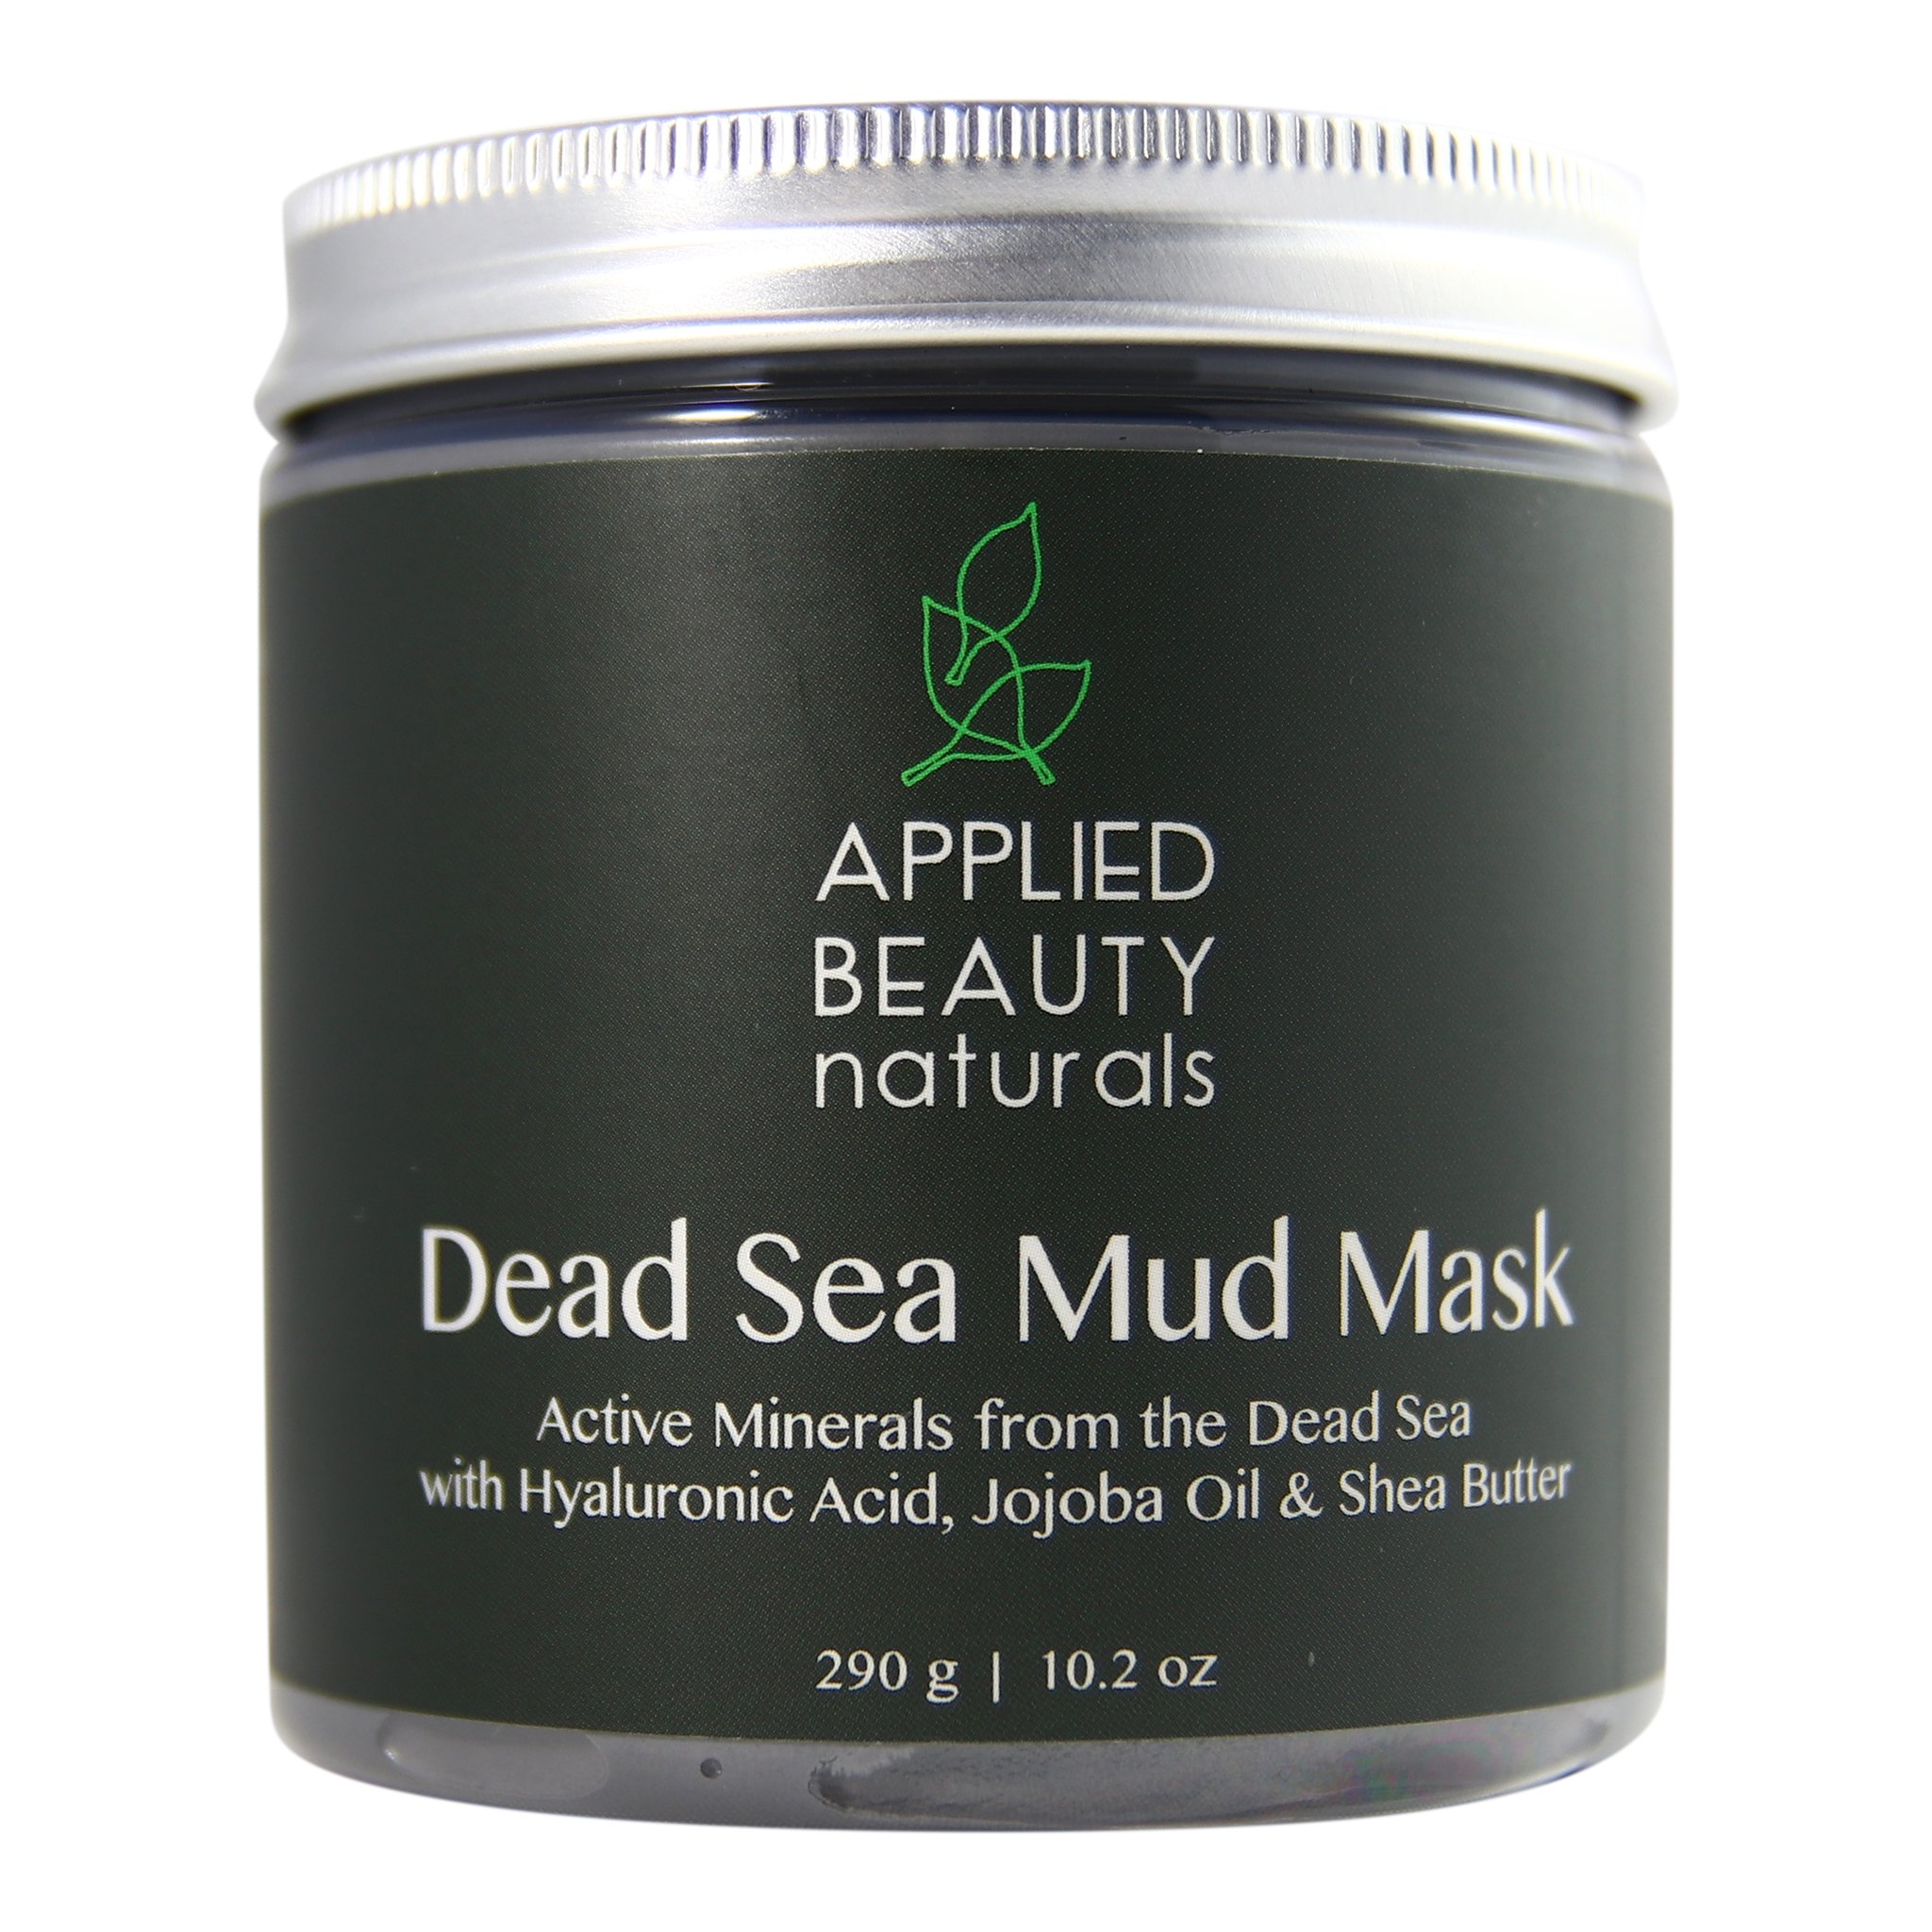 Product review of an All-Natural Dead Sea Mud Mask by Maple Holistics